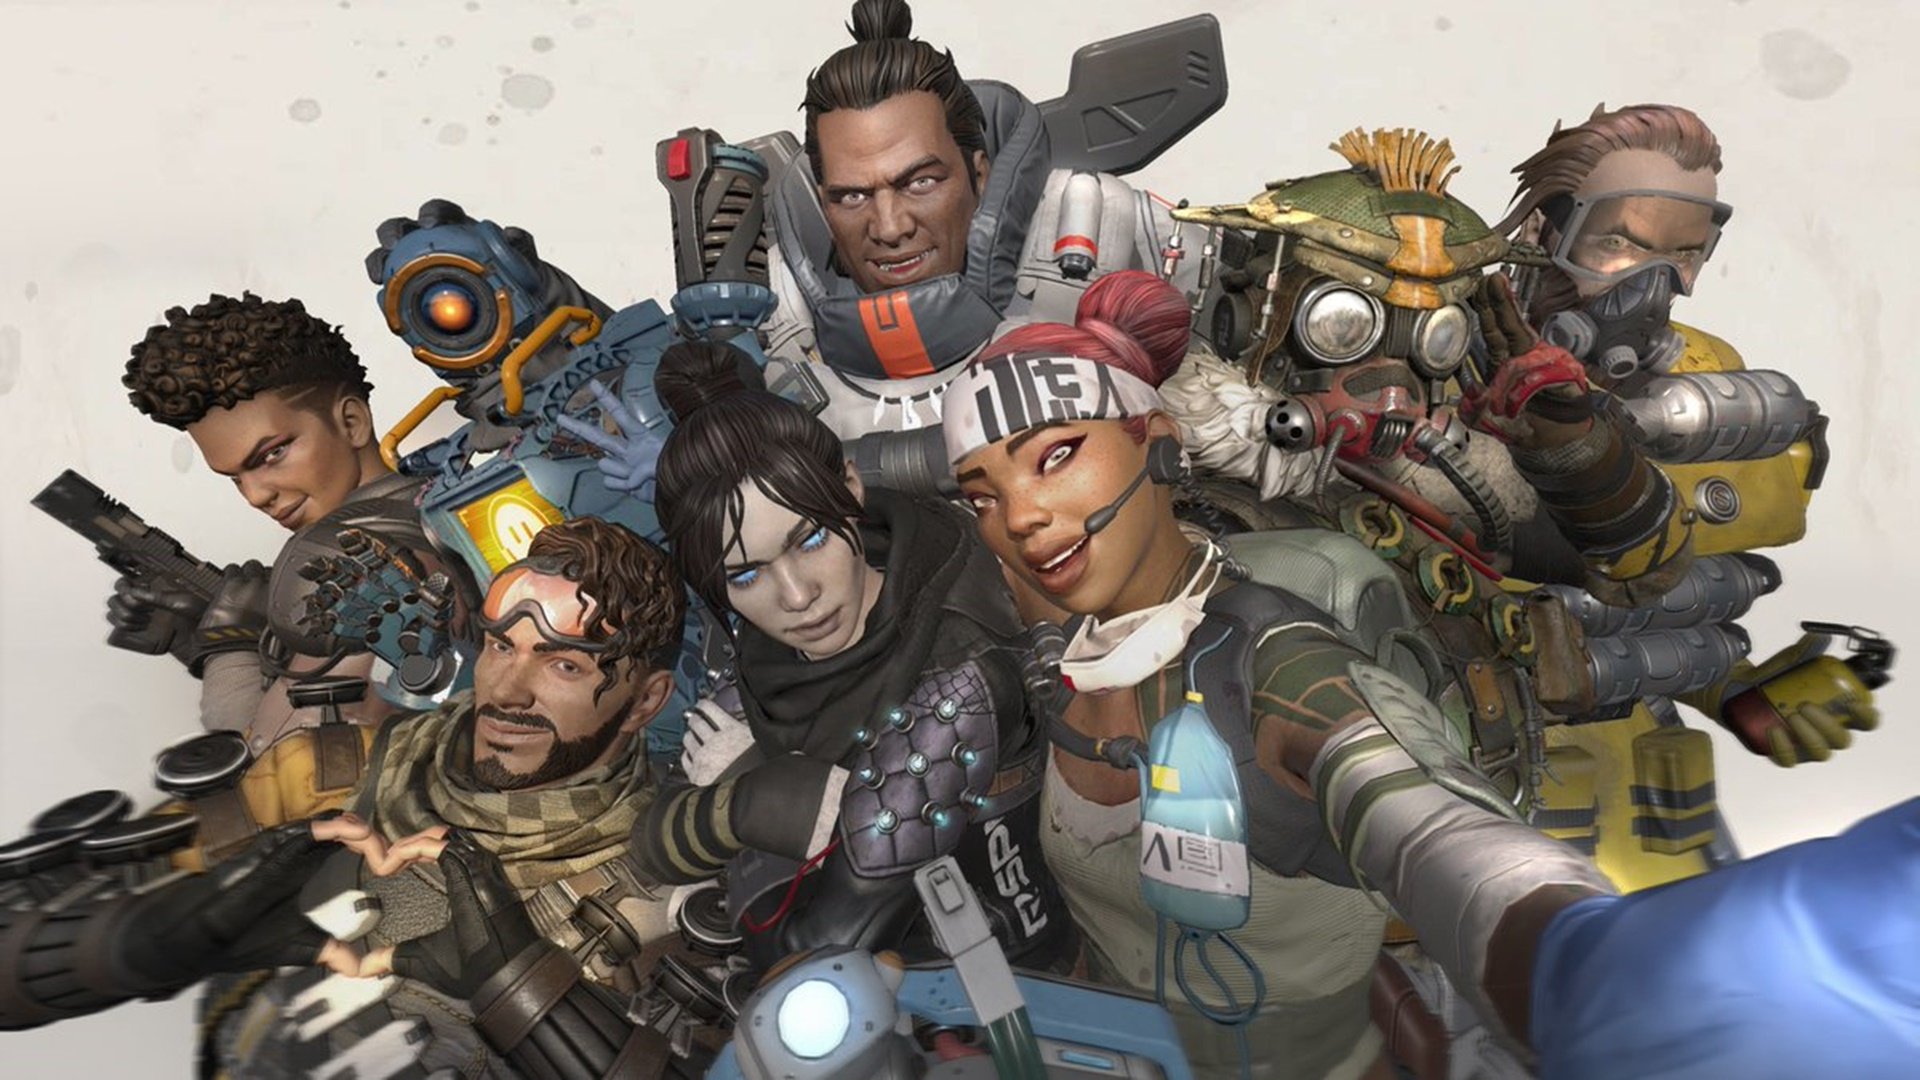 Dynamic ensemble of Apex Legends characters showcasing diverse abilities and personalities